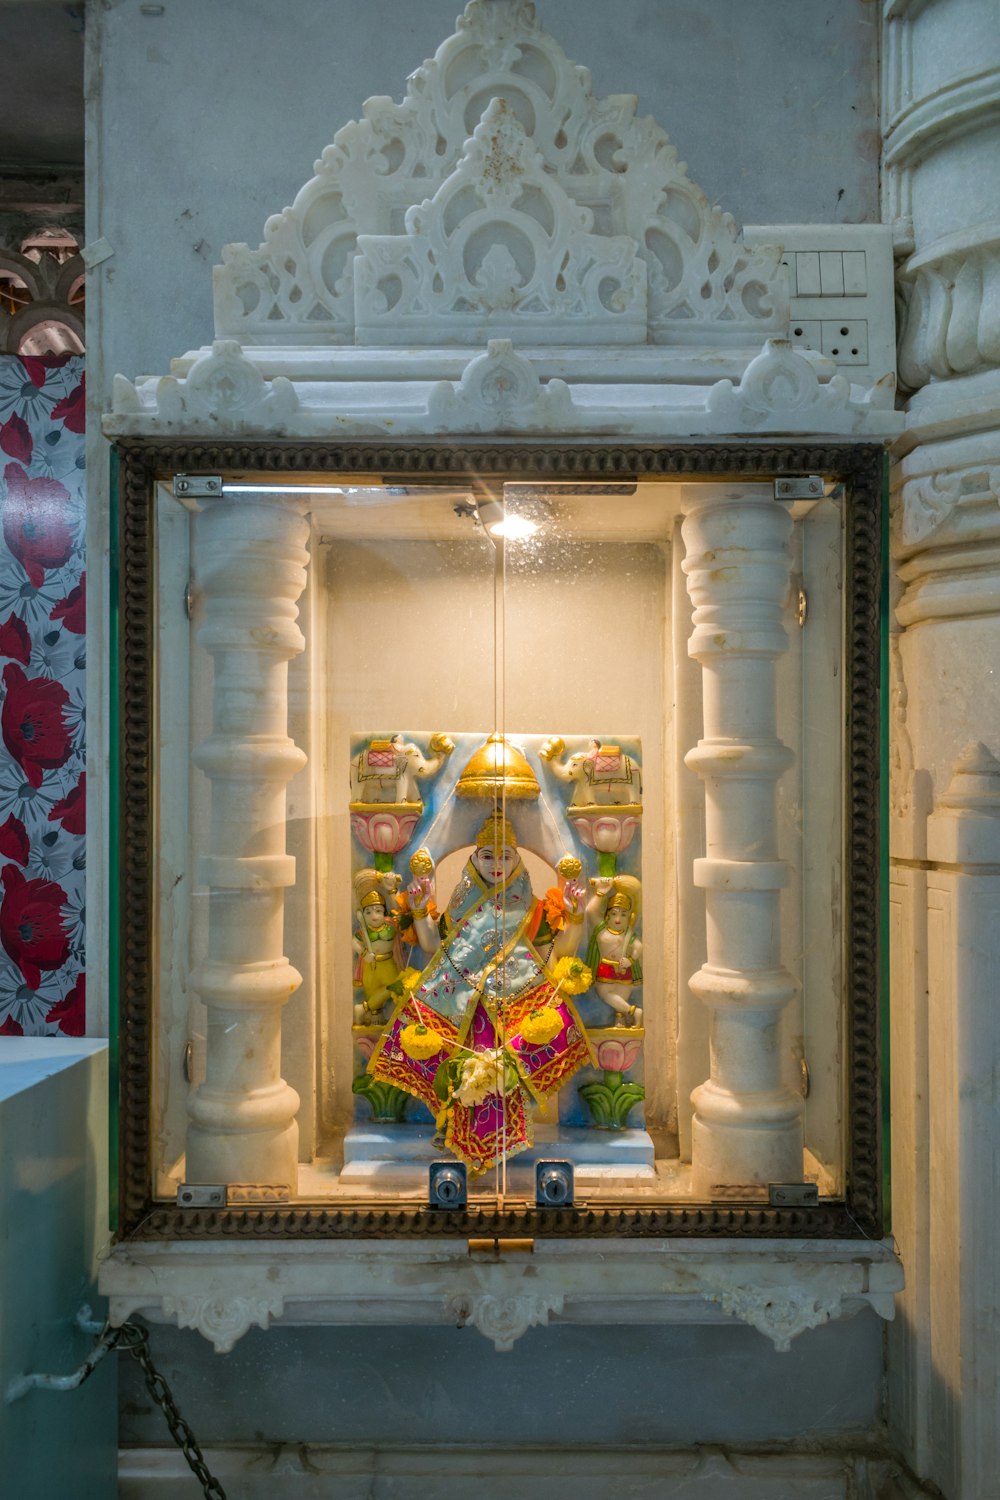 a small shrine with a painting on the wall